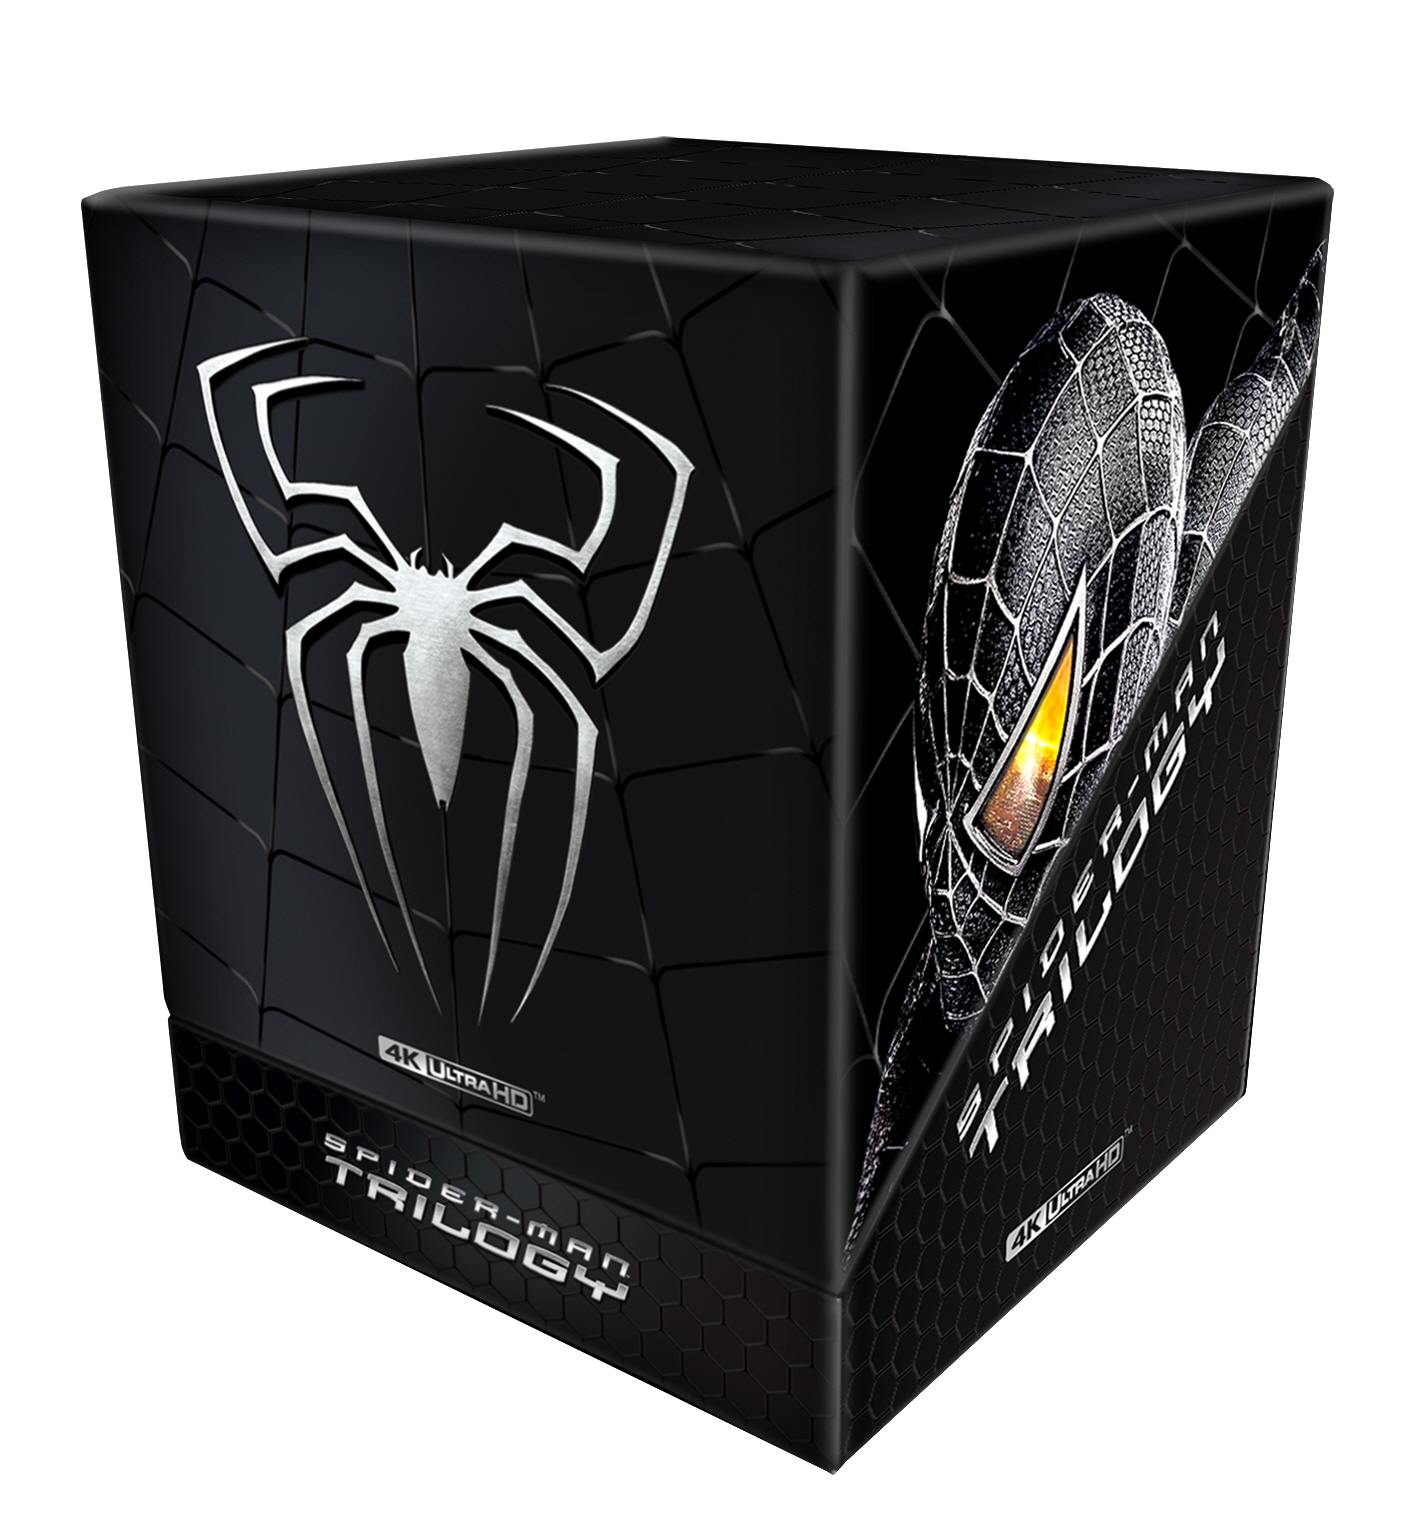 [Blu-ray] Spider-Man Trilogy One Click 4K(2disc: 4K UHD + BD) Steelbook LE(Weetcollcection Exclusive No.11)